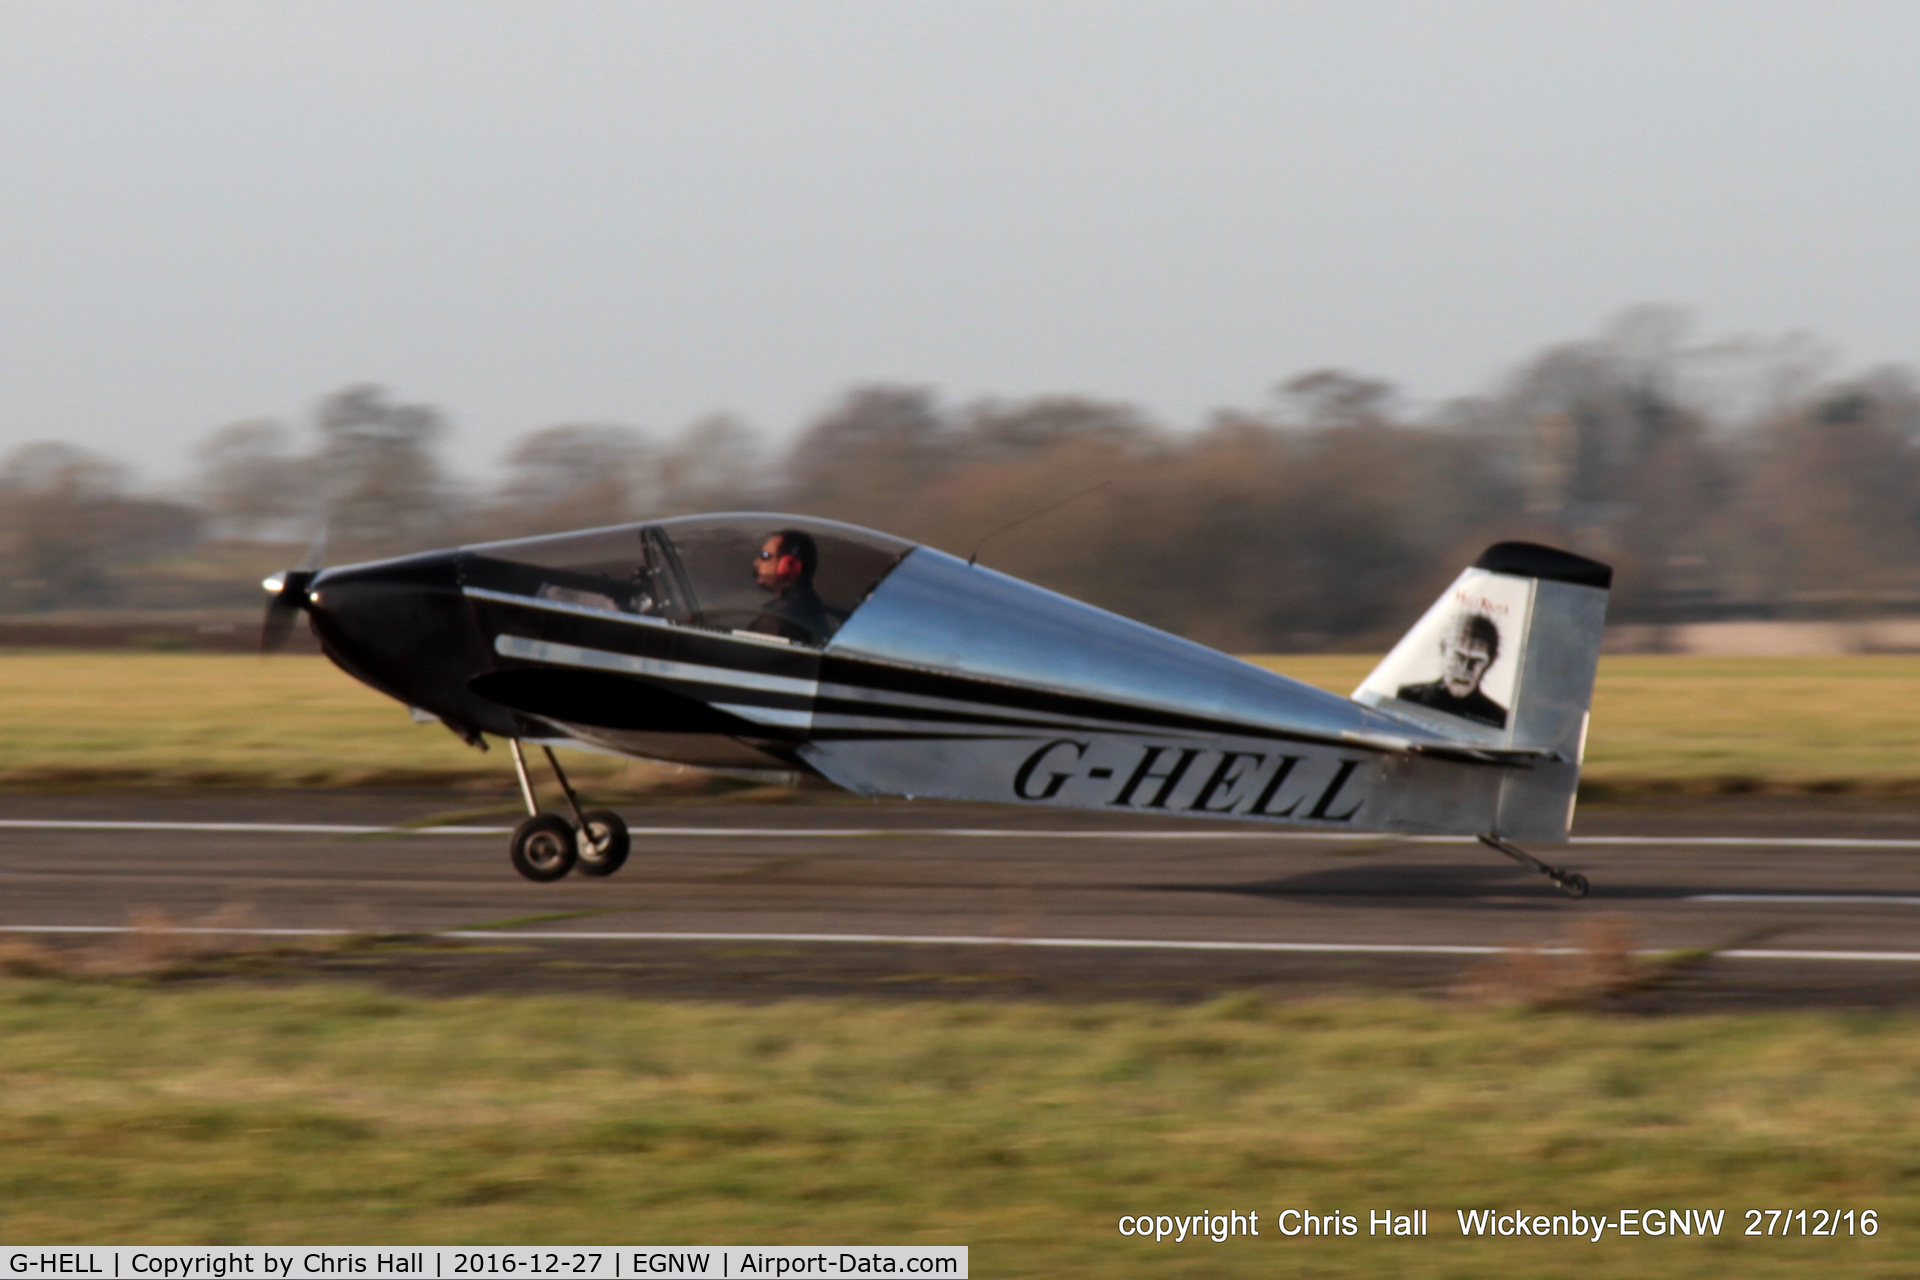 G-HELL, 2015 Sonex 3300 C/N LAA 337-15182, at the Wickenby 